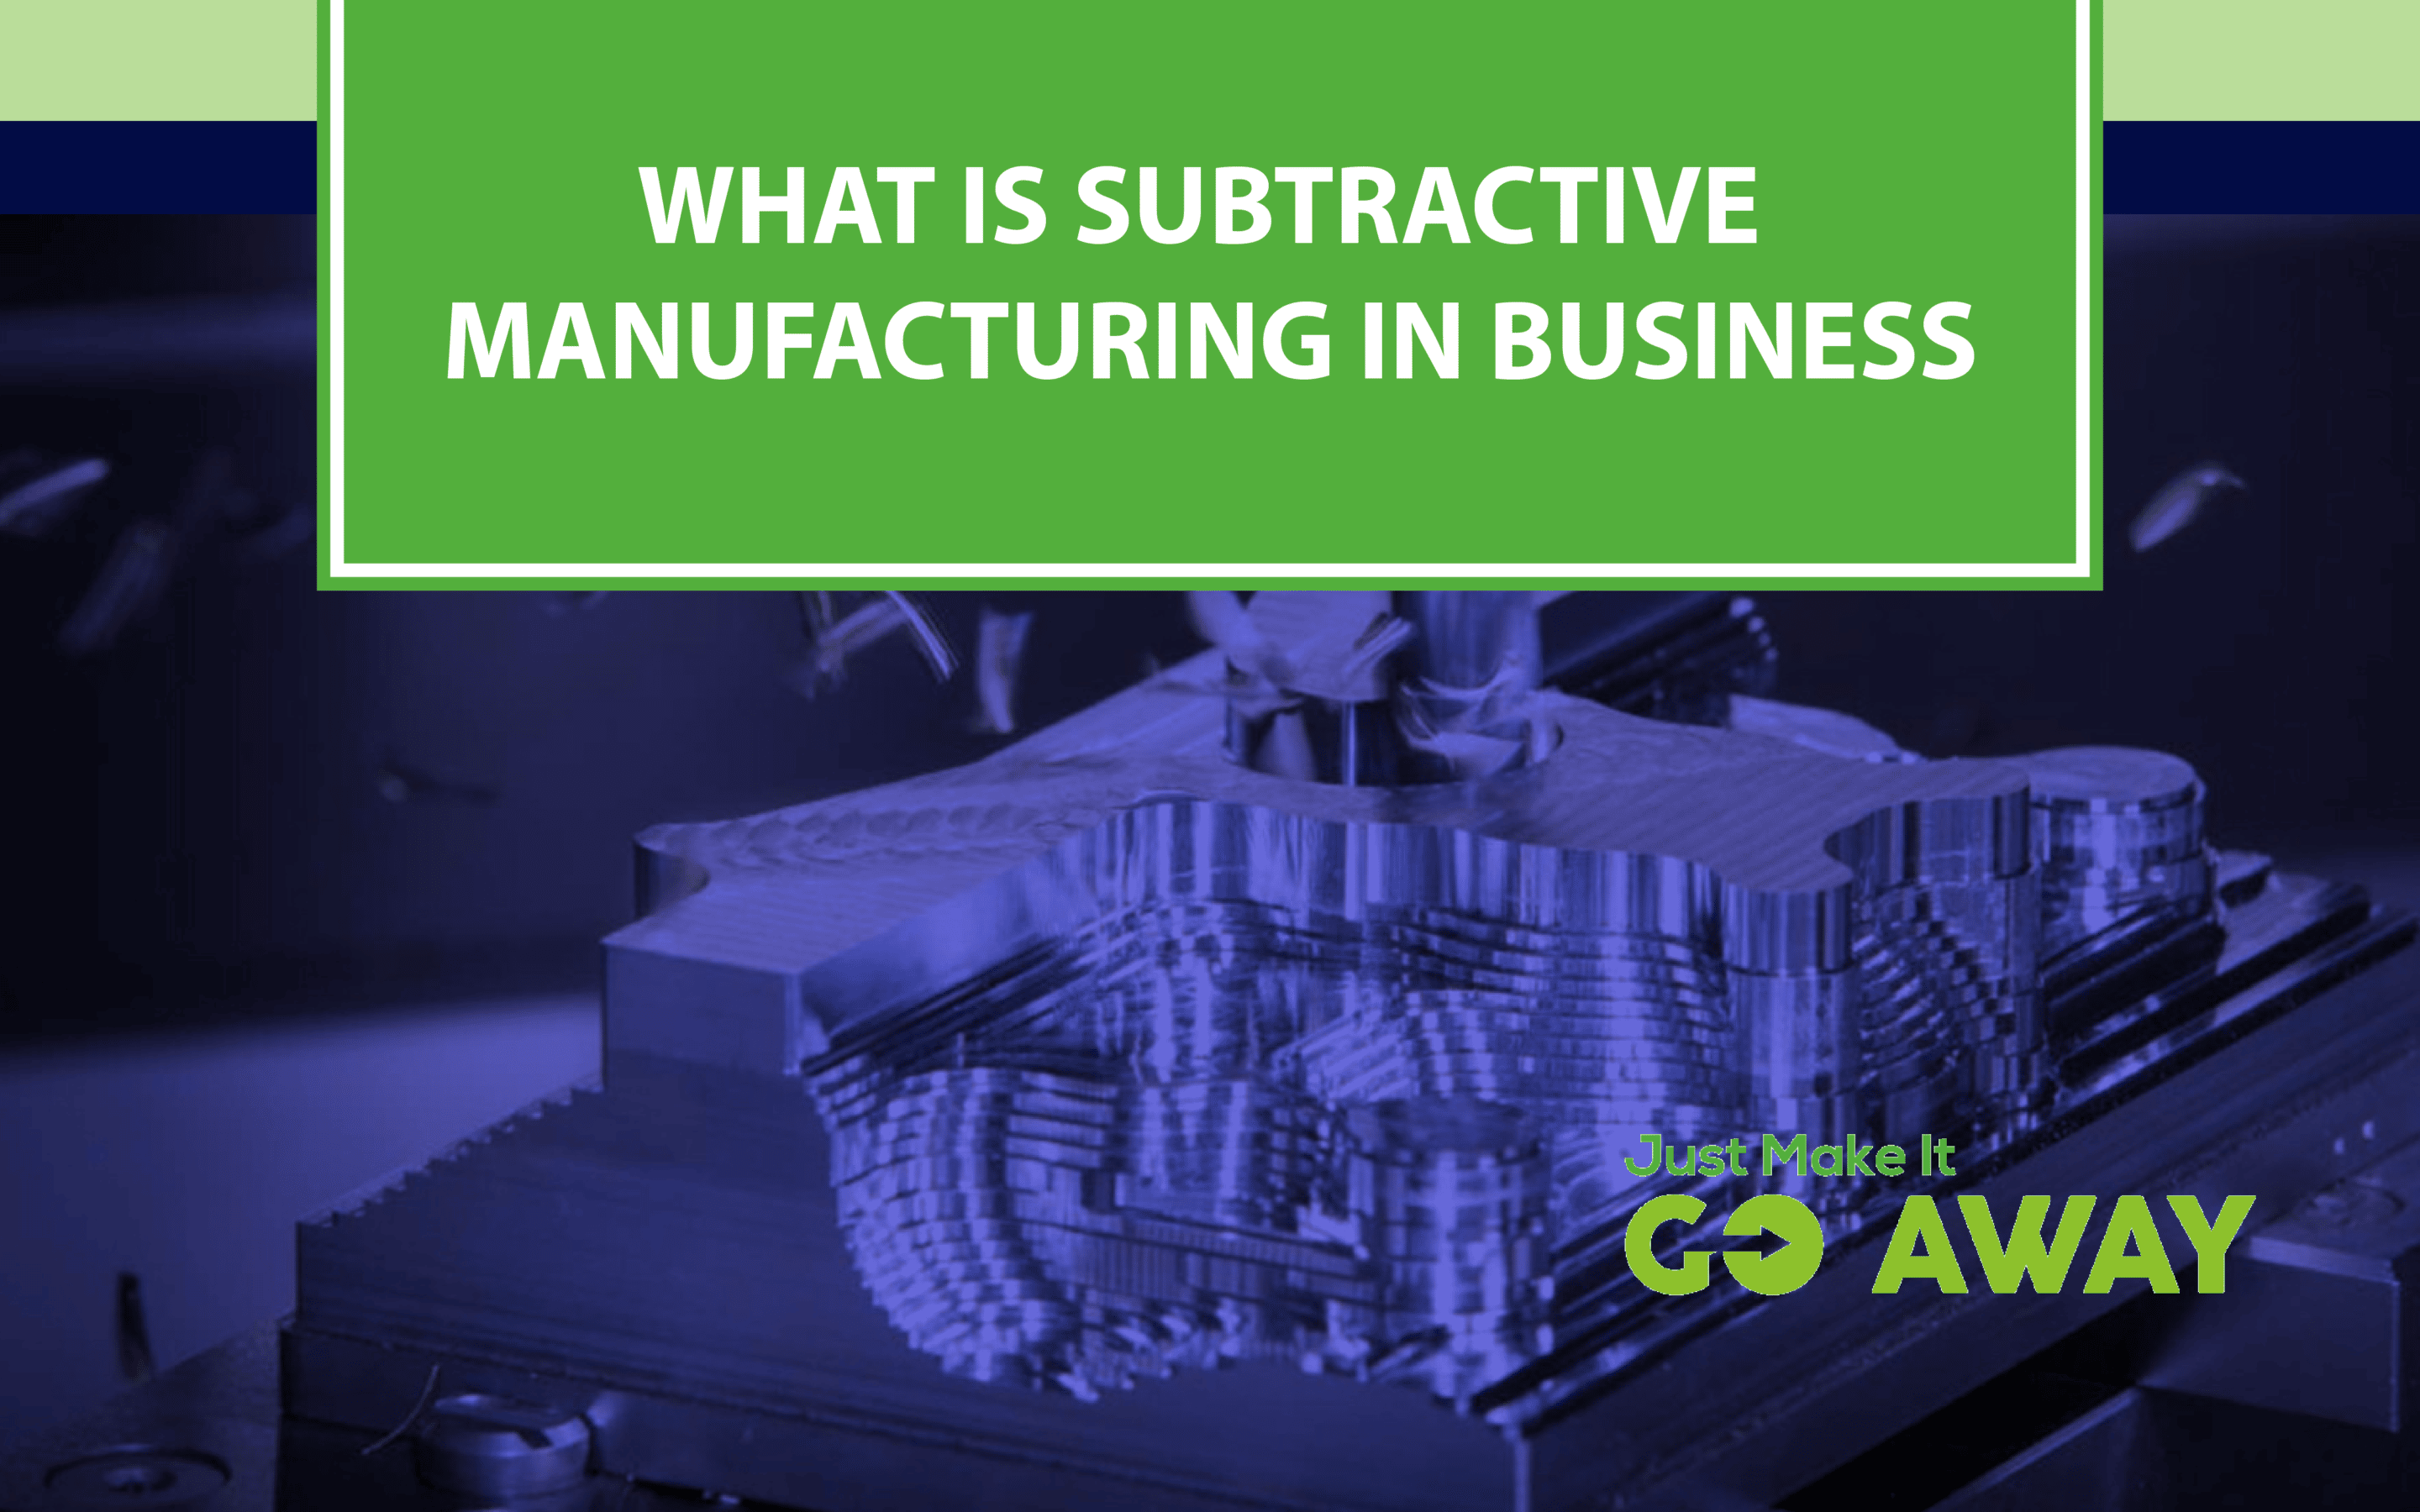 Subtractive Manufacturing in business